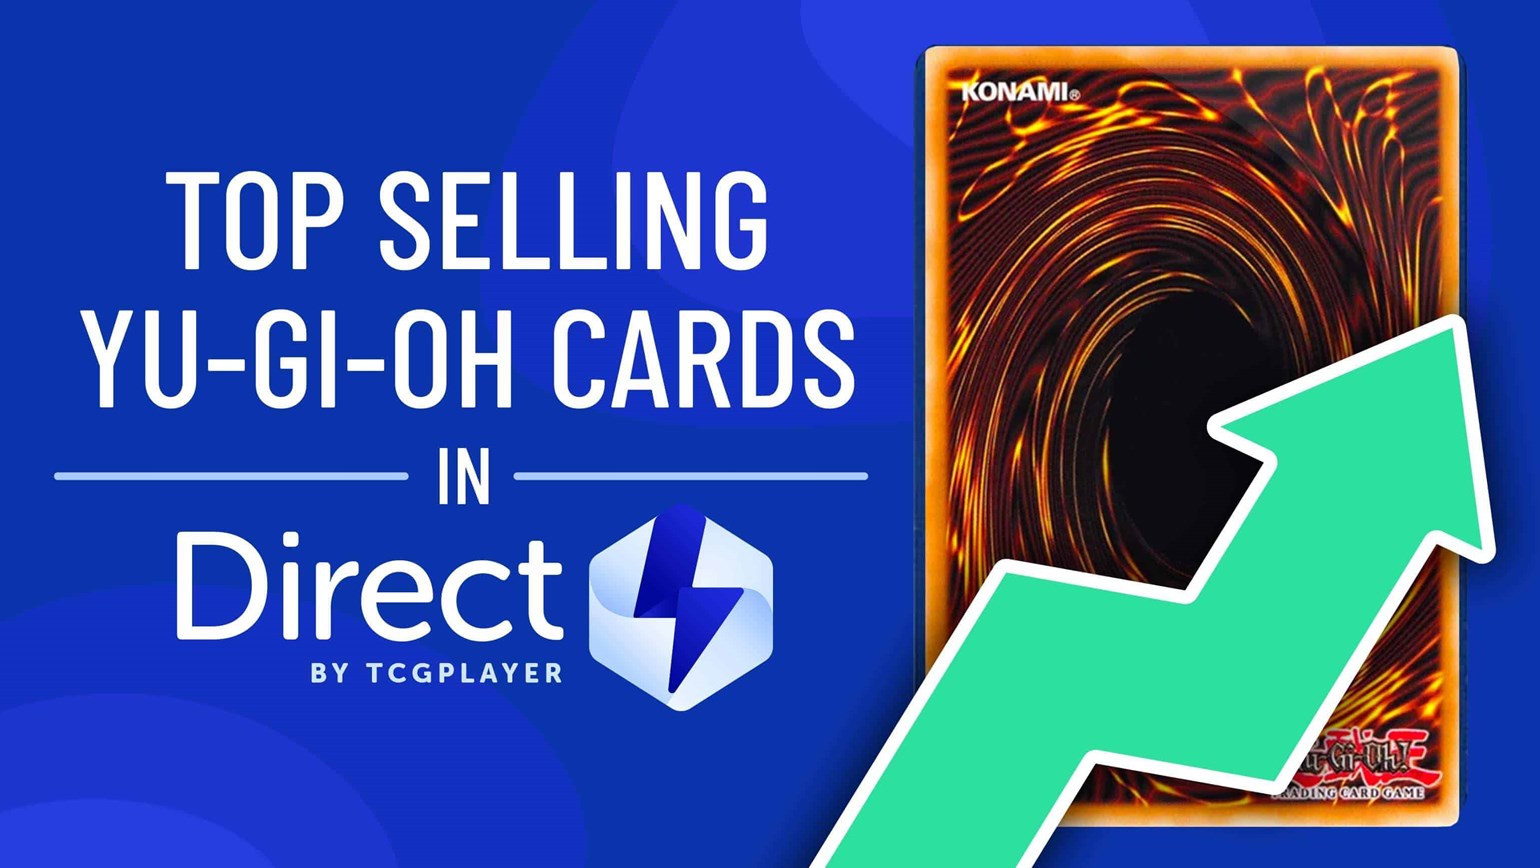 September Top Selling Yu-Gi-Oh! Cards in Direct by TCGplayer